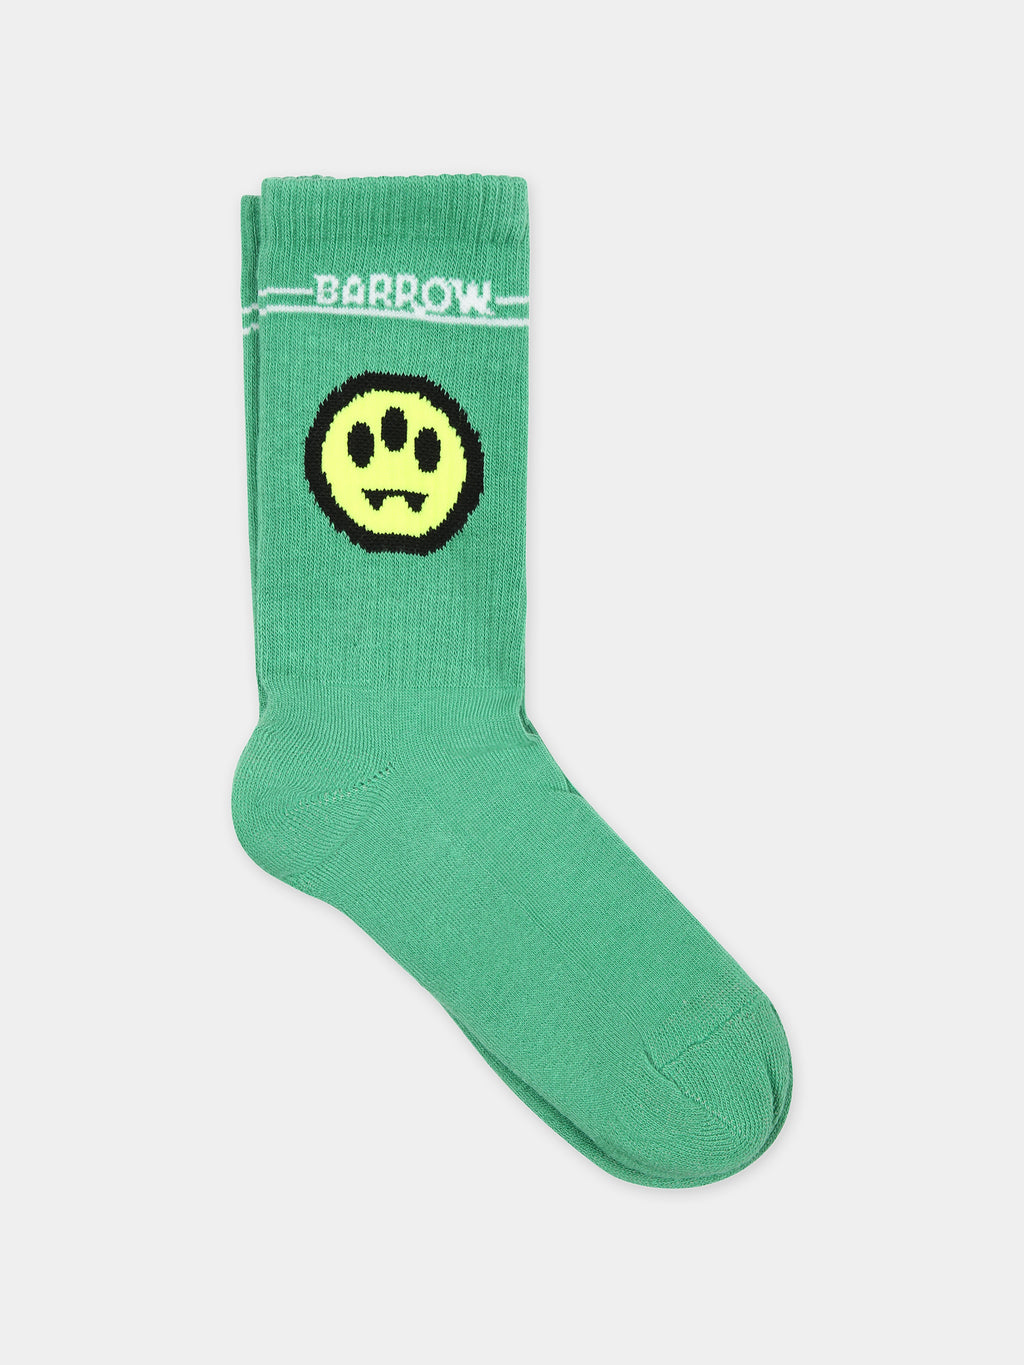 Green socks for kids with smiley